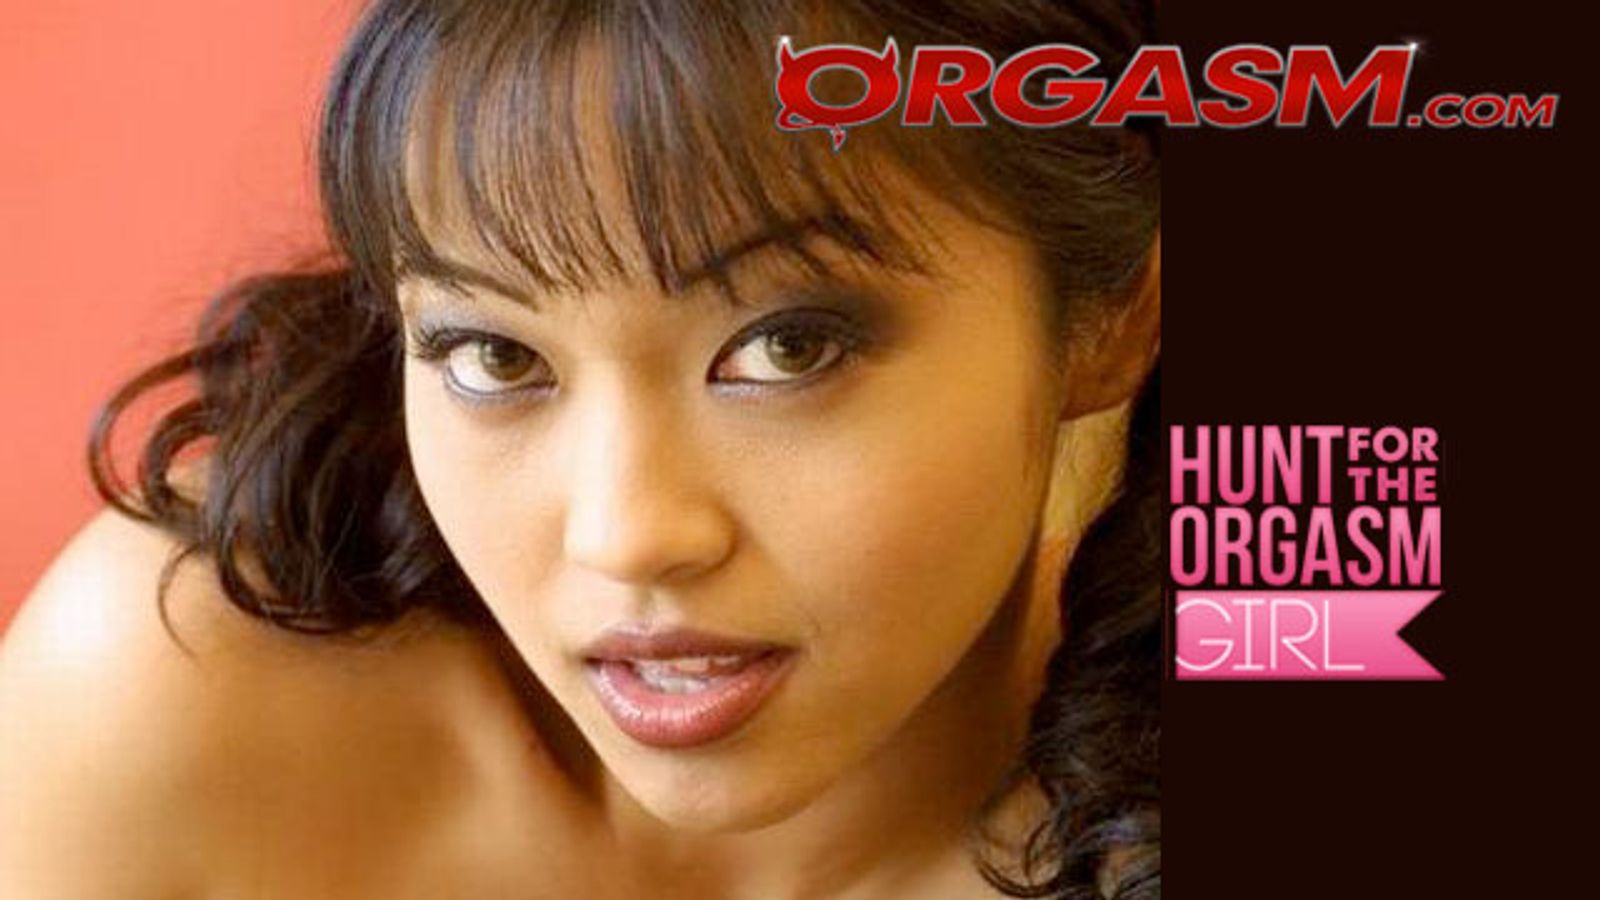 Mika Tan Is Flavor of the Month at Orgasm.com